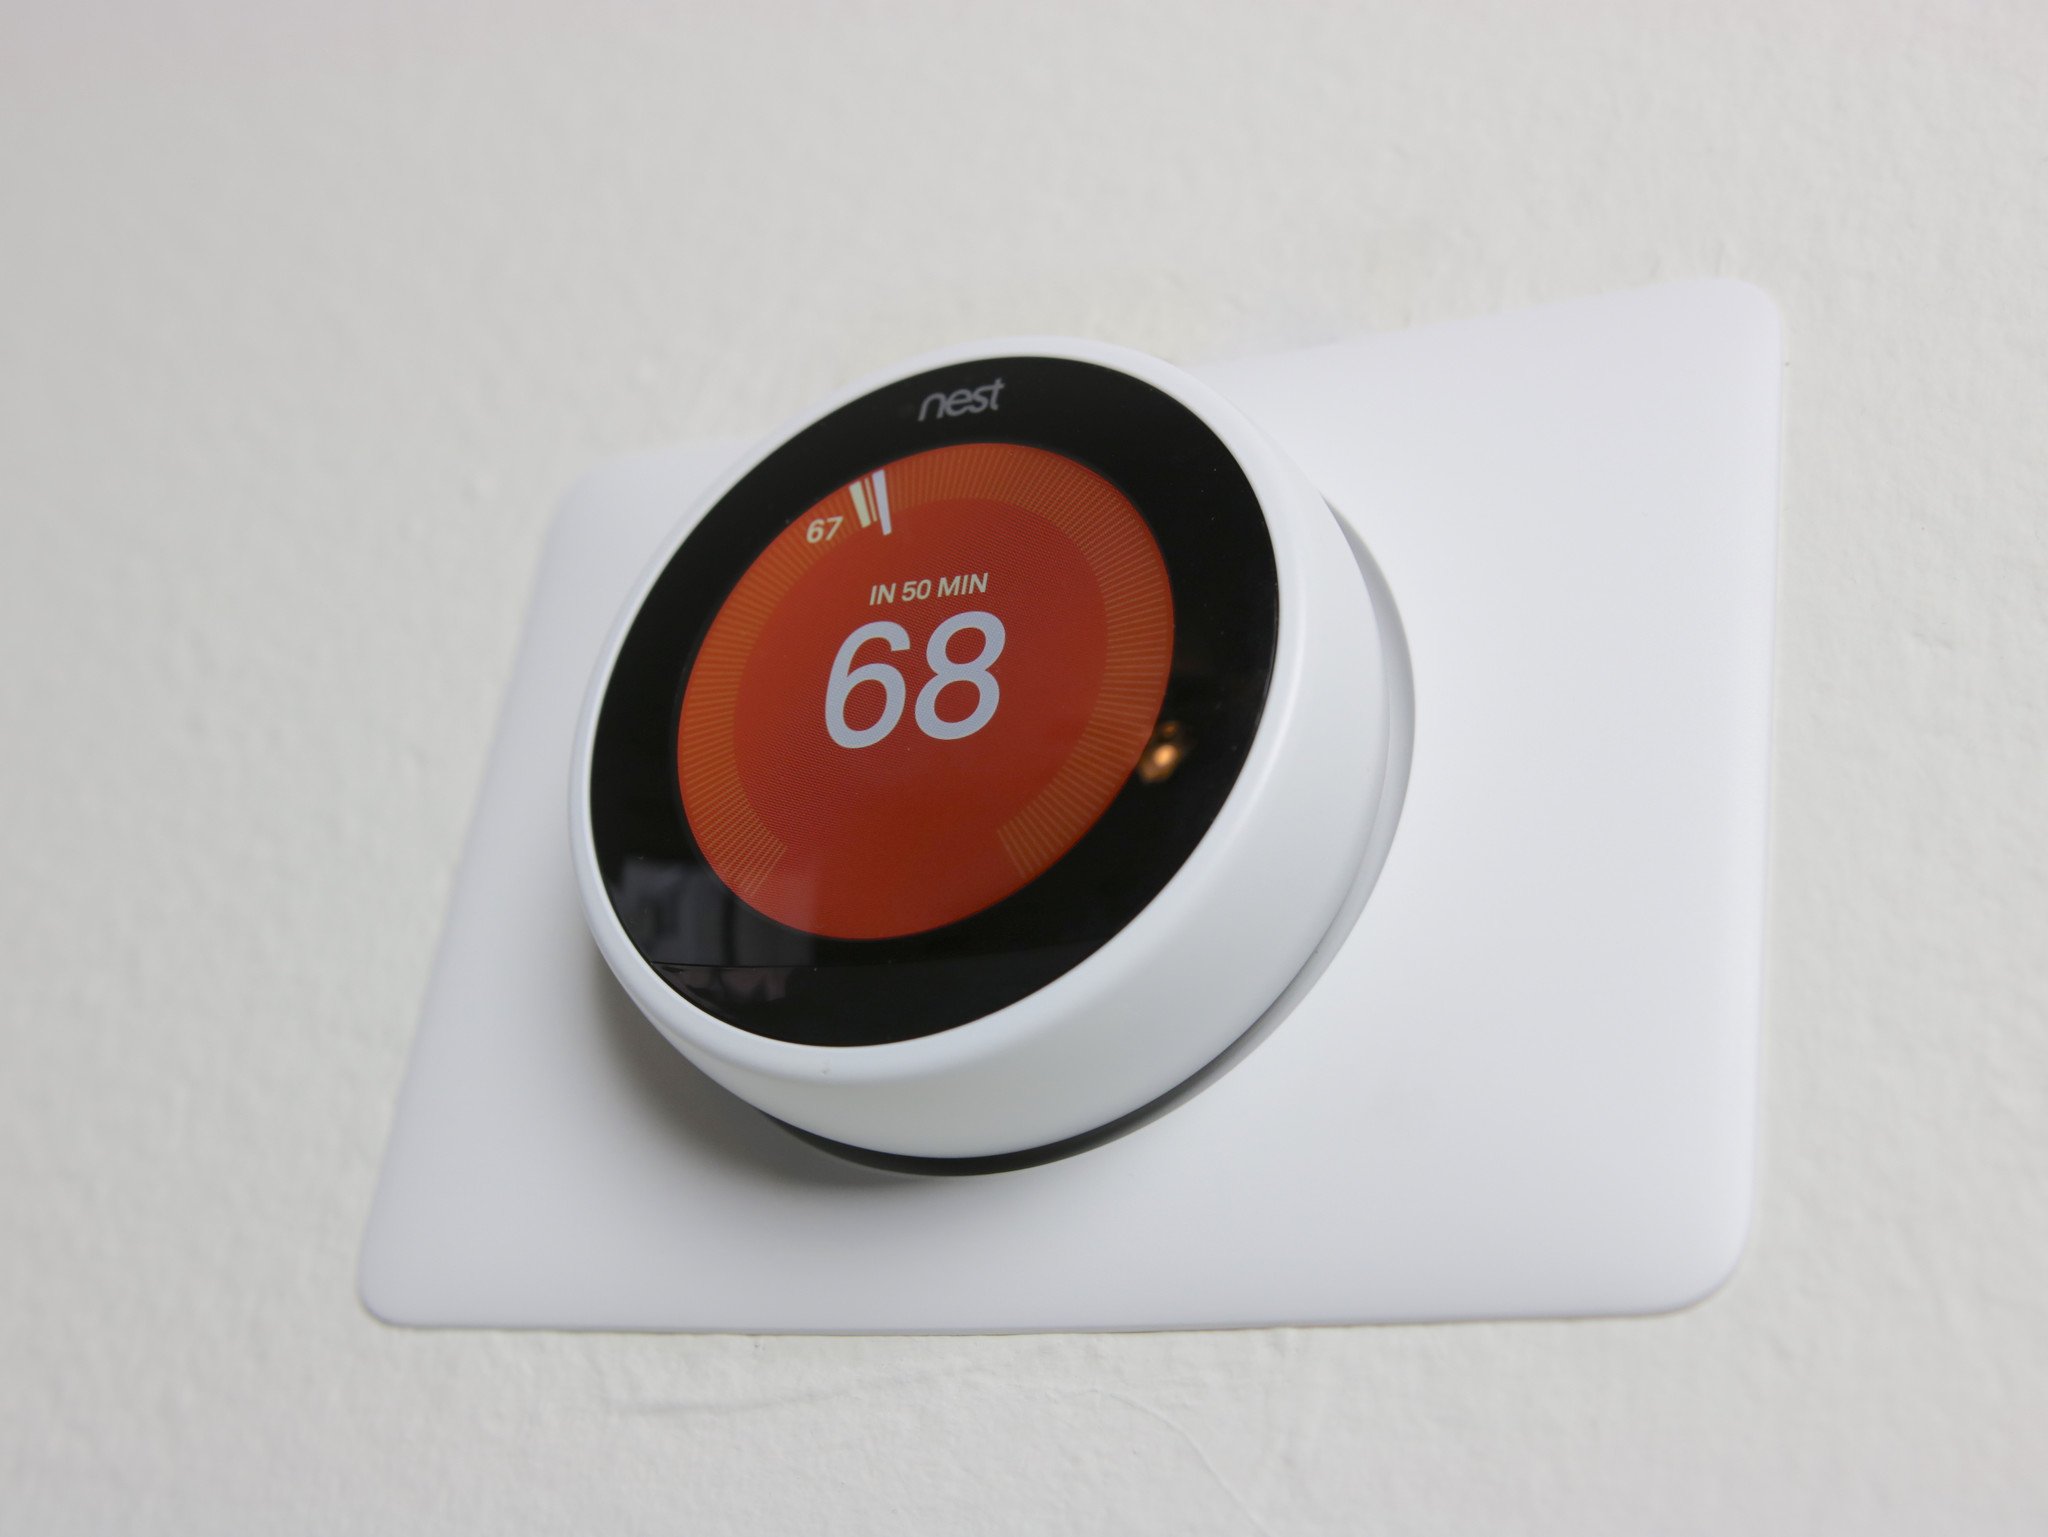 Google loses another patent battle, this time on its Nest thermostat